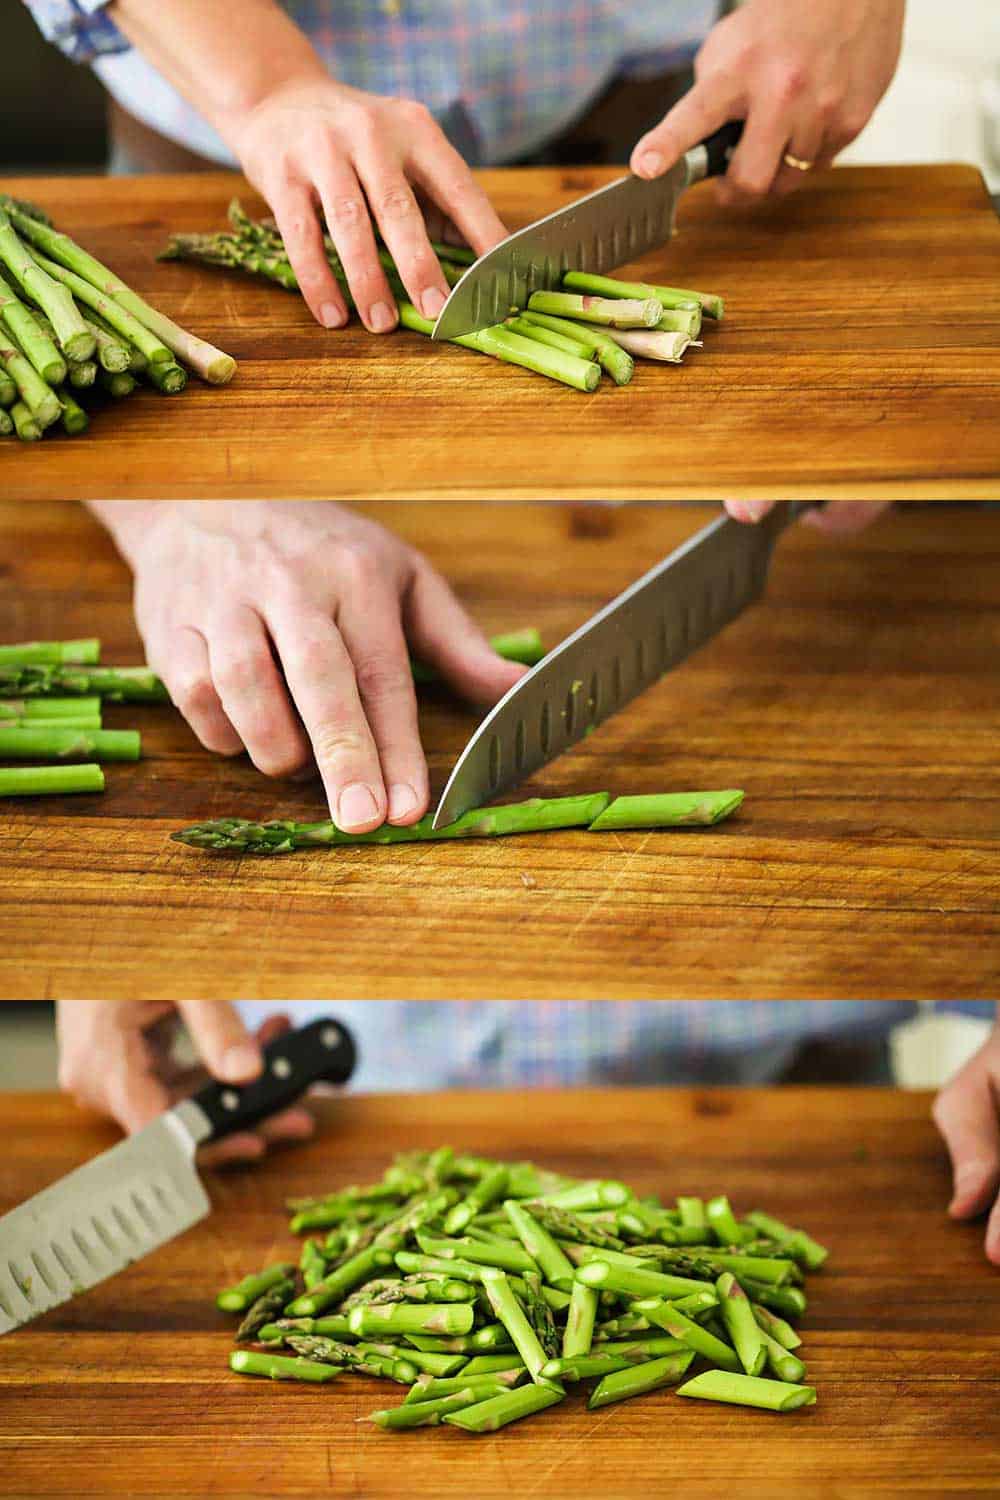 Three images of two hands using a large knife to cut asparagus into bite-sized pieces on wooden cutting board. 